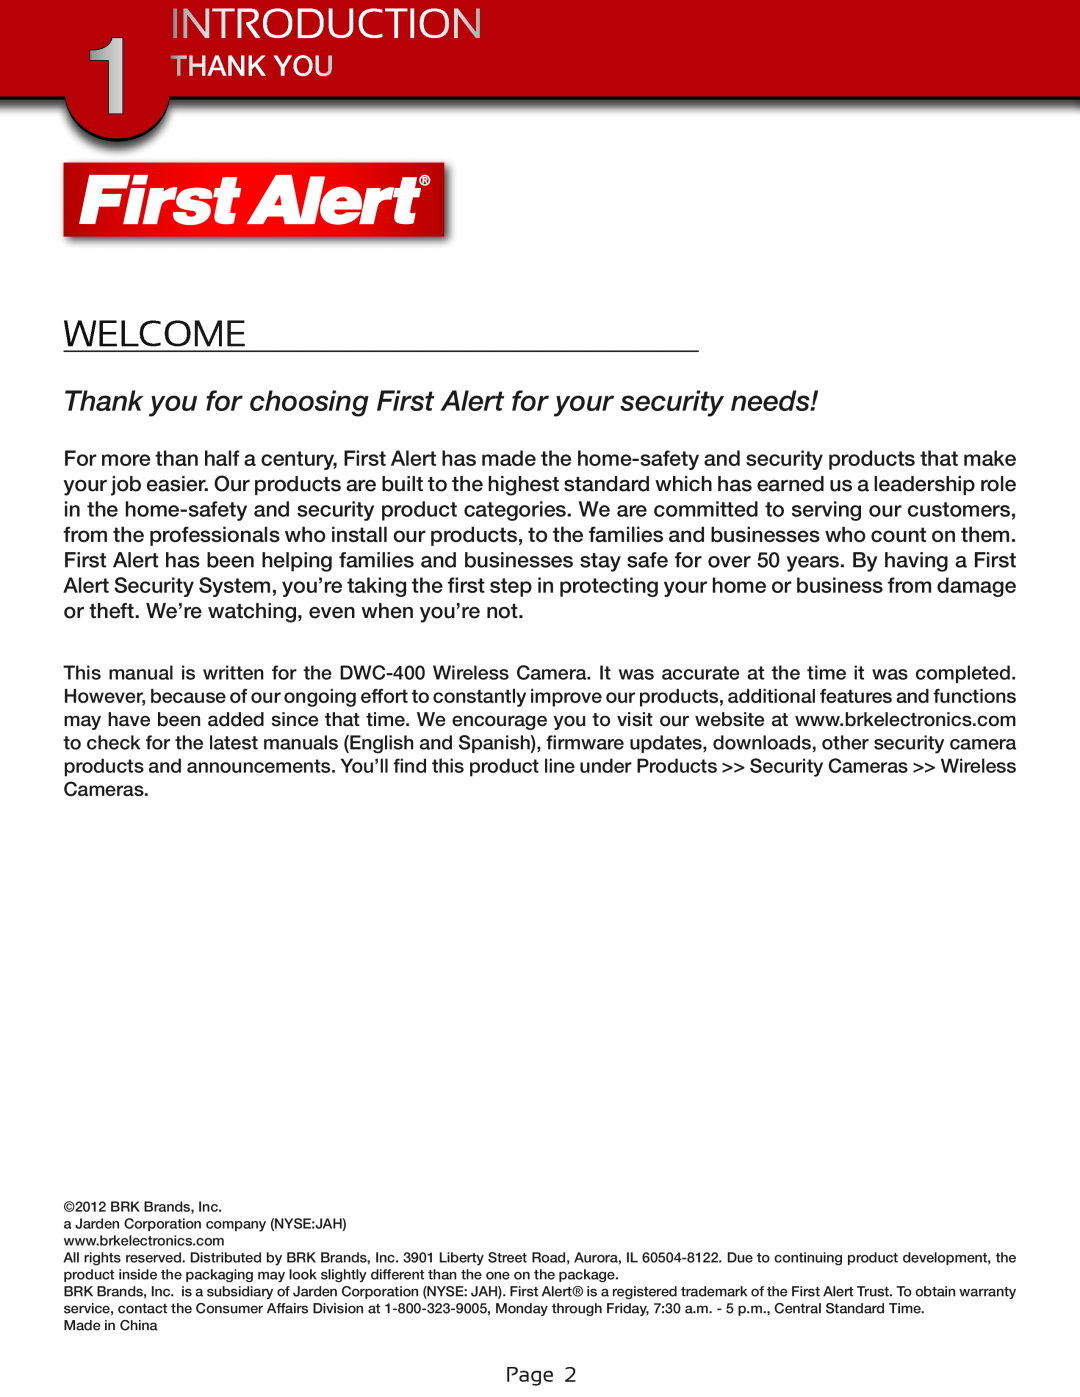 First Alert DWC-400 user manual Introduction, Welcome, Thank You 